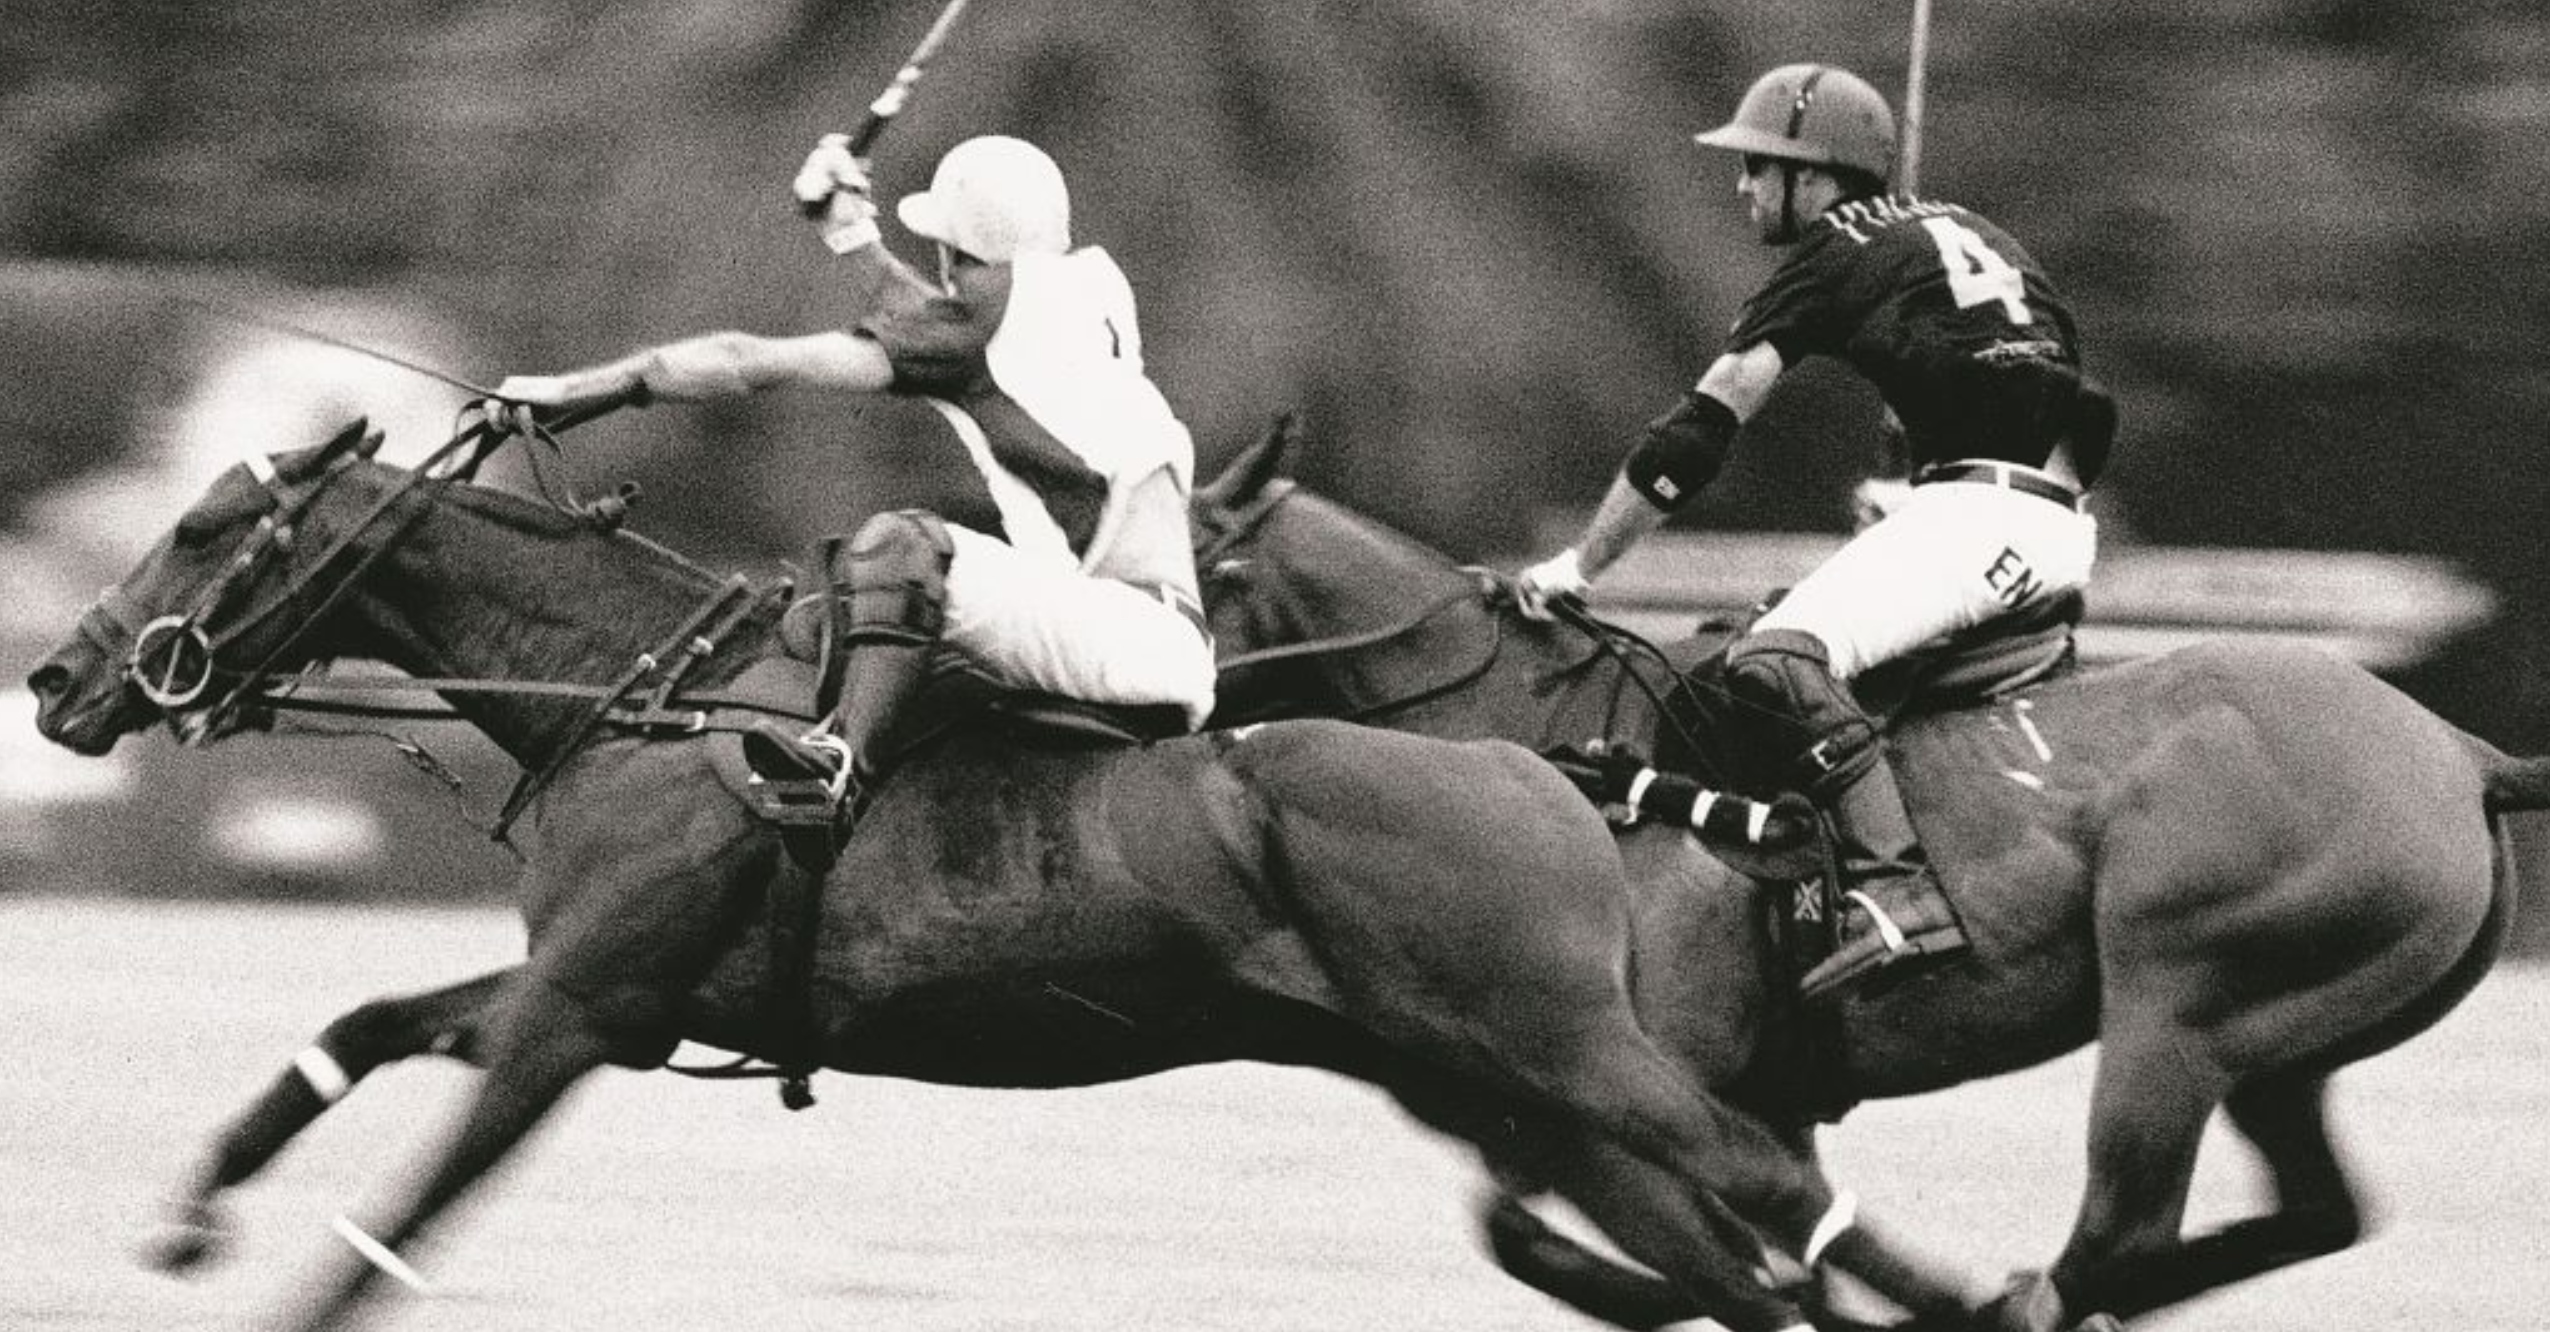 Polo Heritage by Aline Coquelle - Coffee Table Book